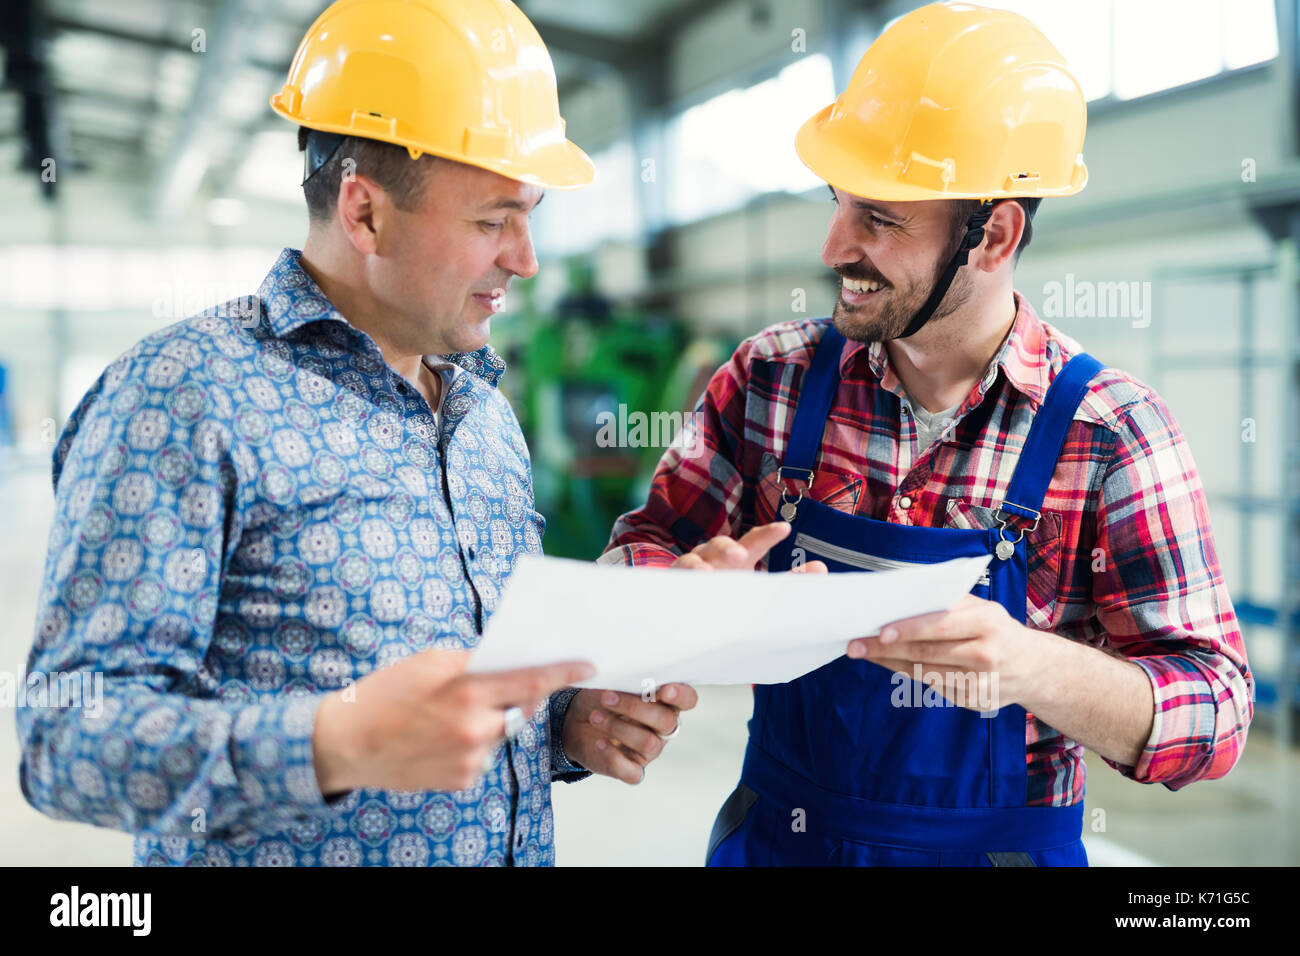 Supervisor and engineer working in metal industry Stock Photo